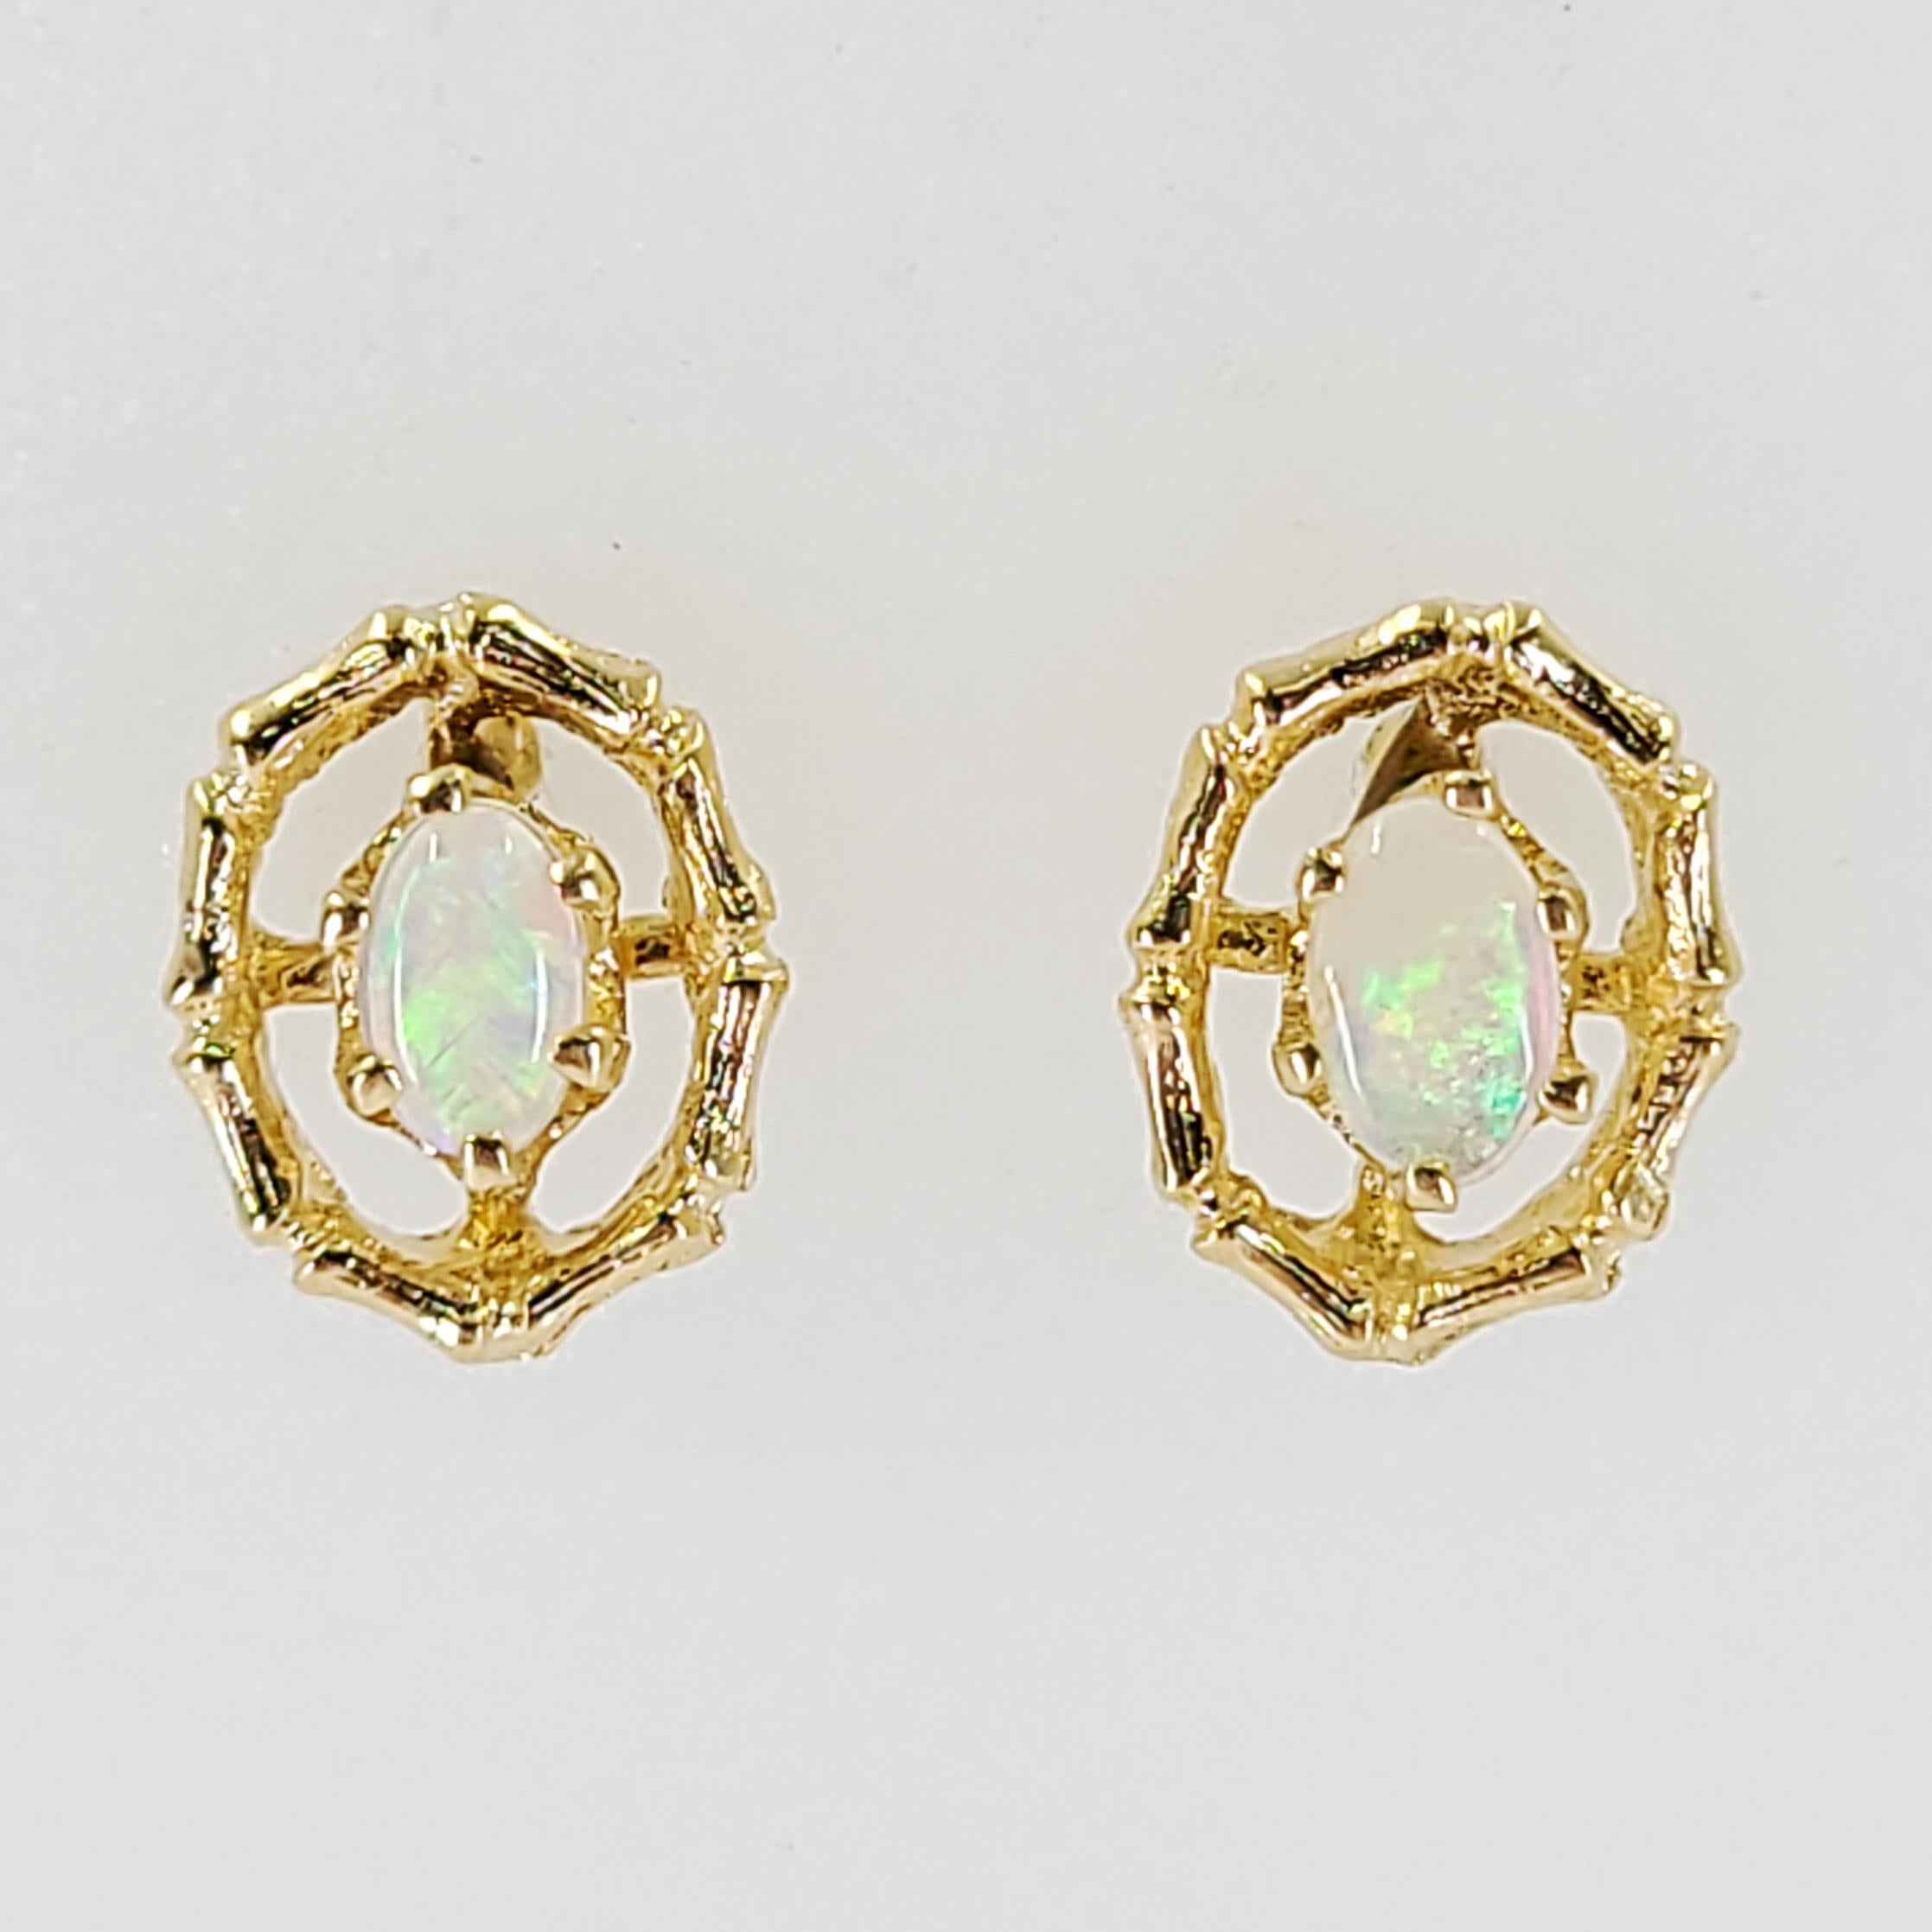 Yellow Gold Bamboo Design Oval Opal Stud Earrings In Good Condition For Sale In Coral Gables, FL